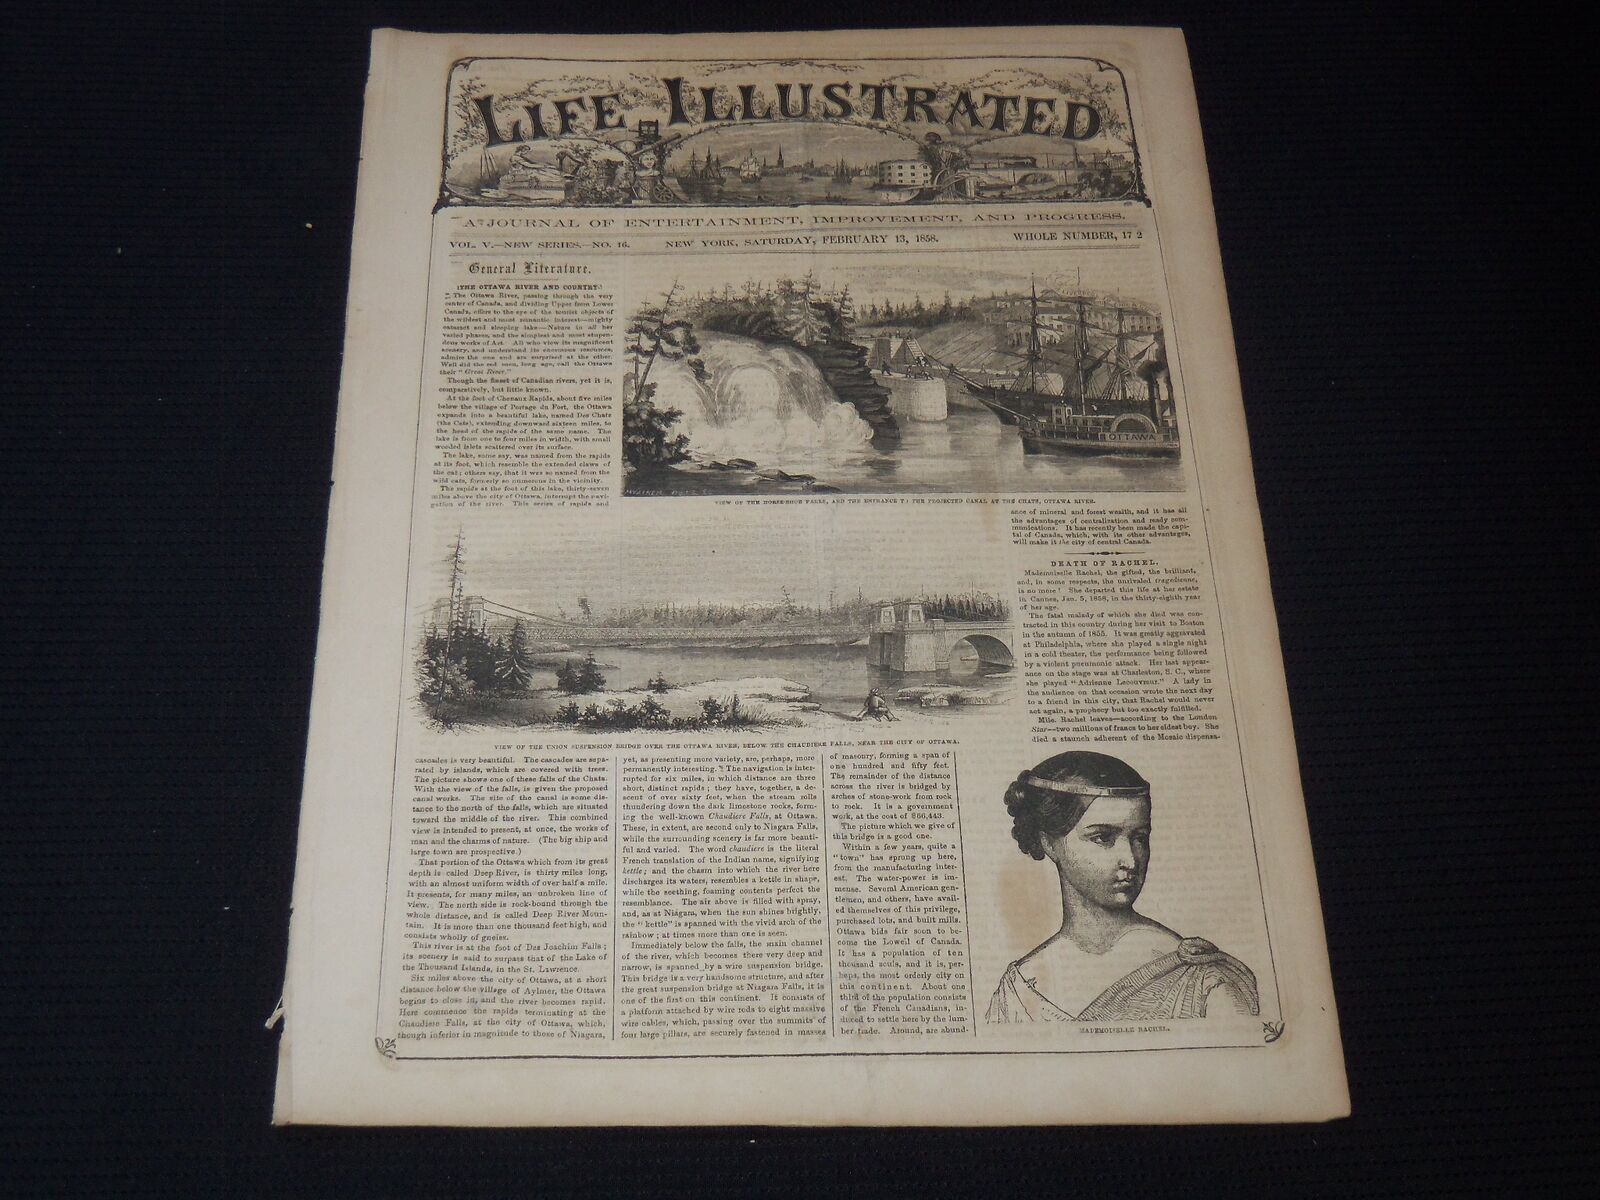 1858 FEBRUARY 13 LIFE ILLUSTRATED NEWSPAPER - OTTAWA RIVER & COUNTRY - NP 5898